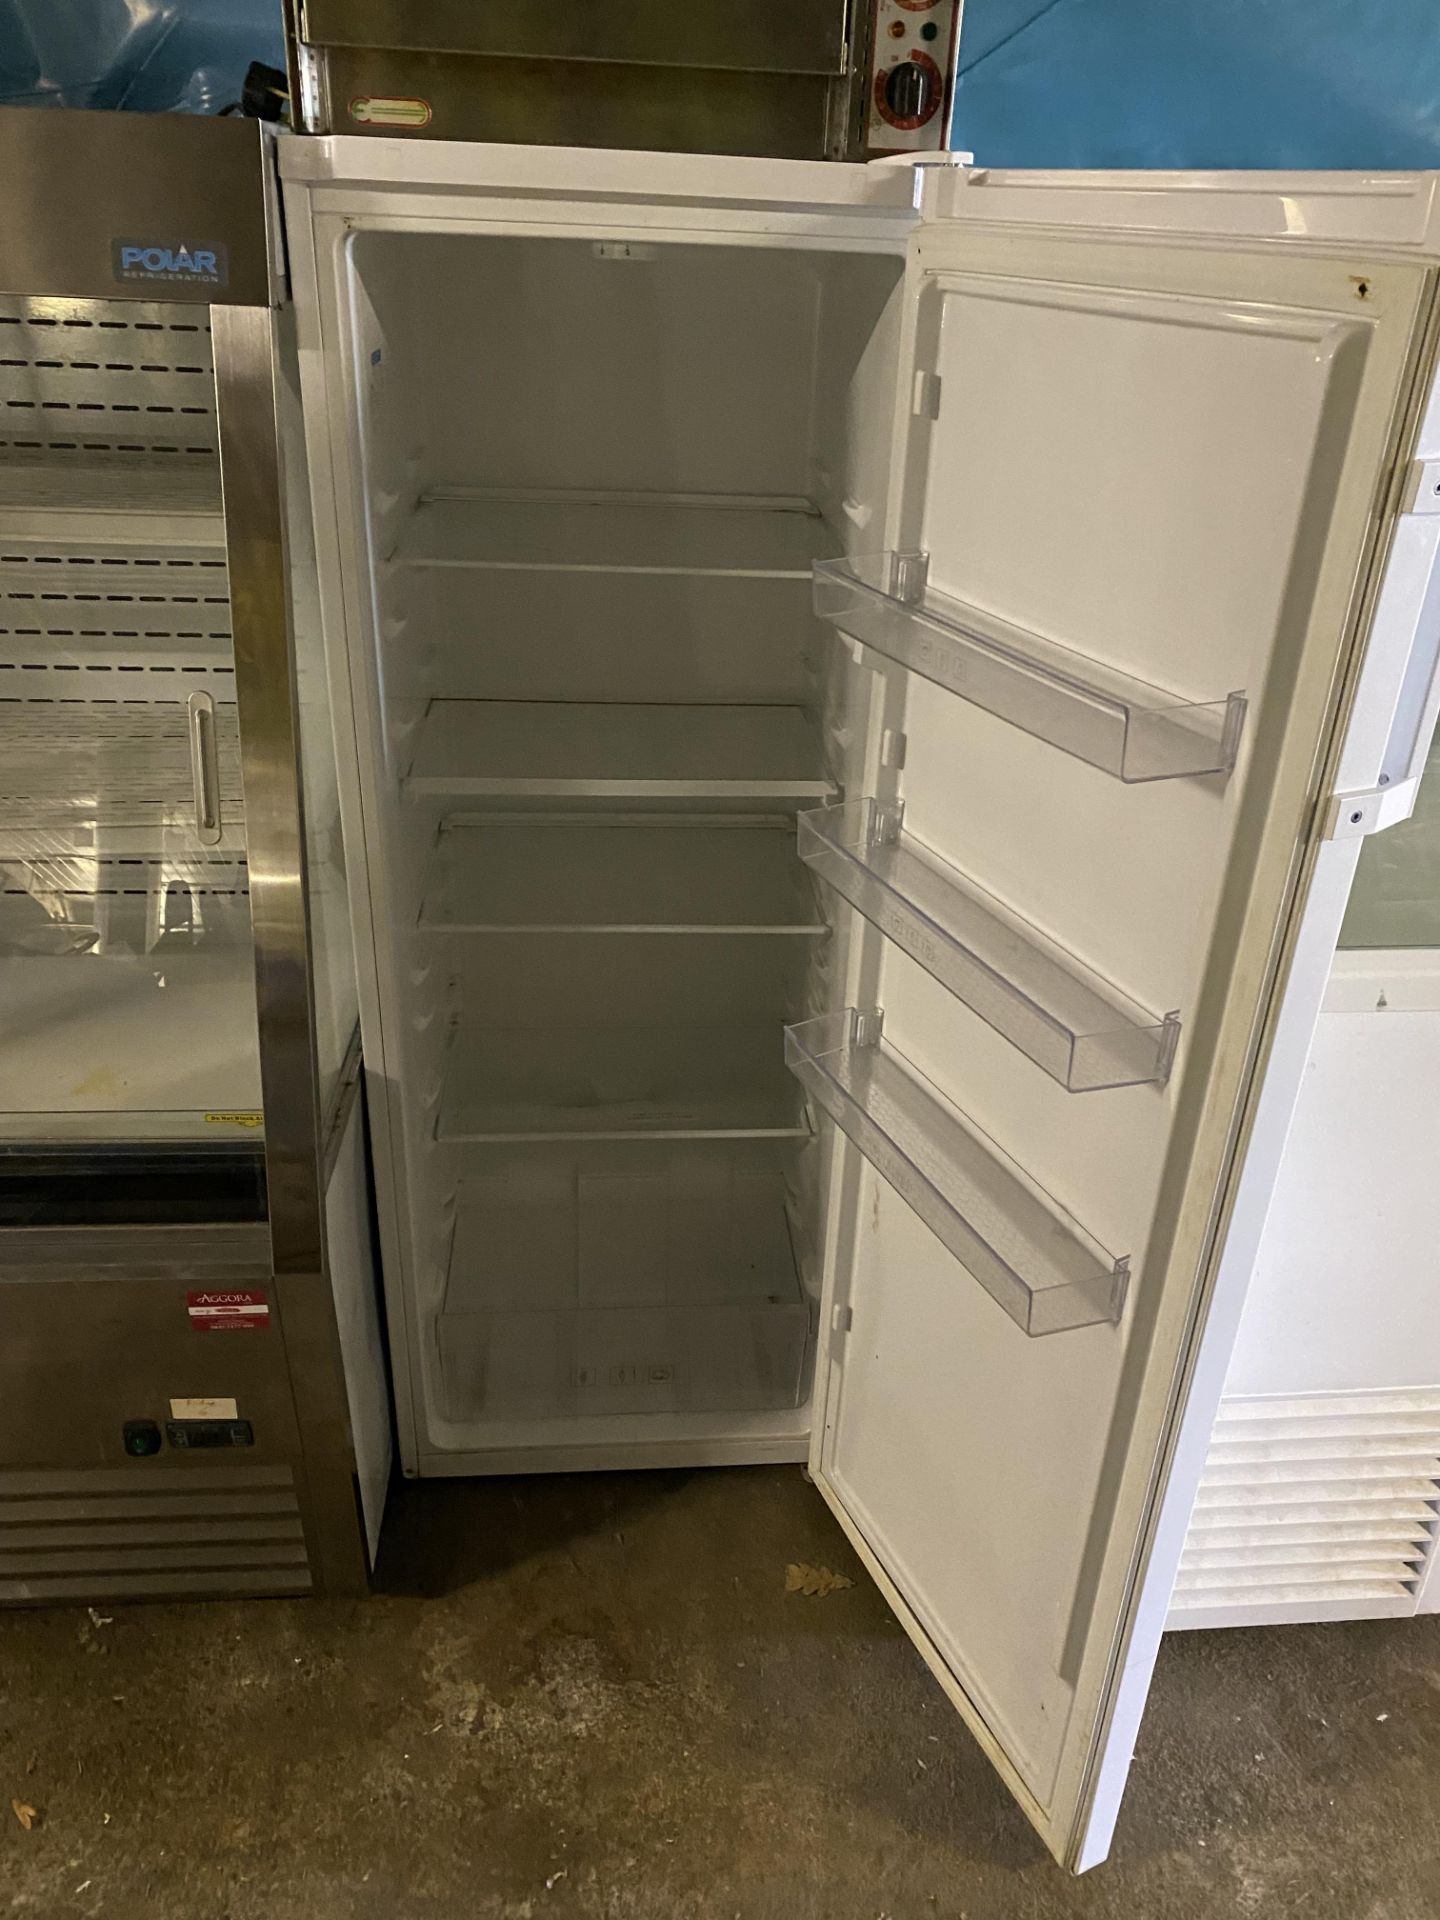 Beko upright domestic fridge, approx 145cm tall (working condition unknown) - Image 2 of 3